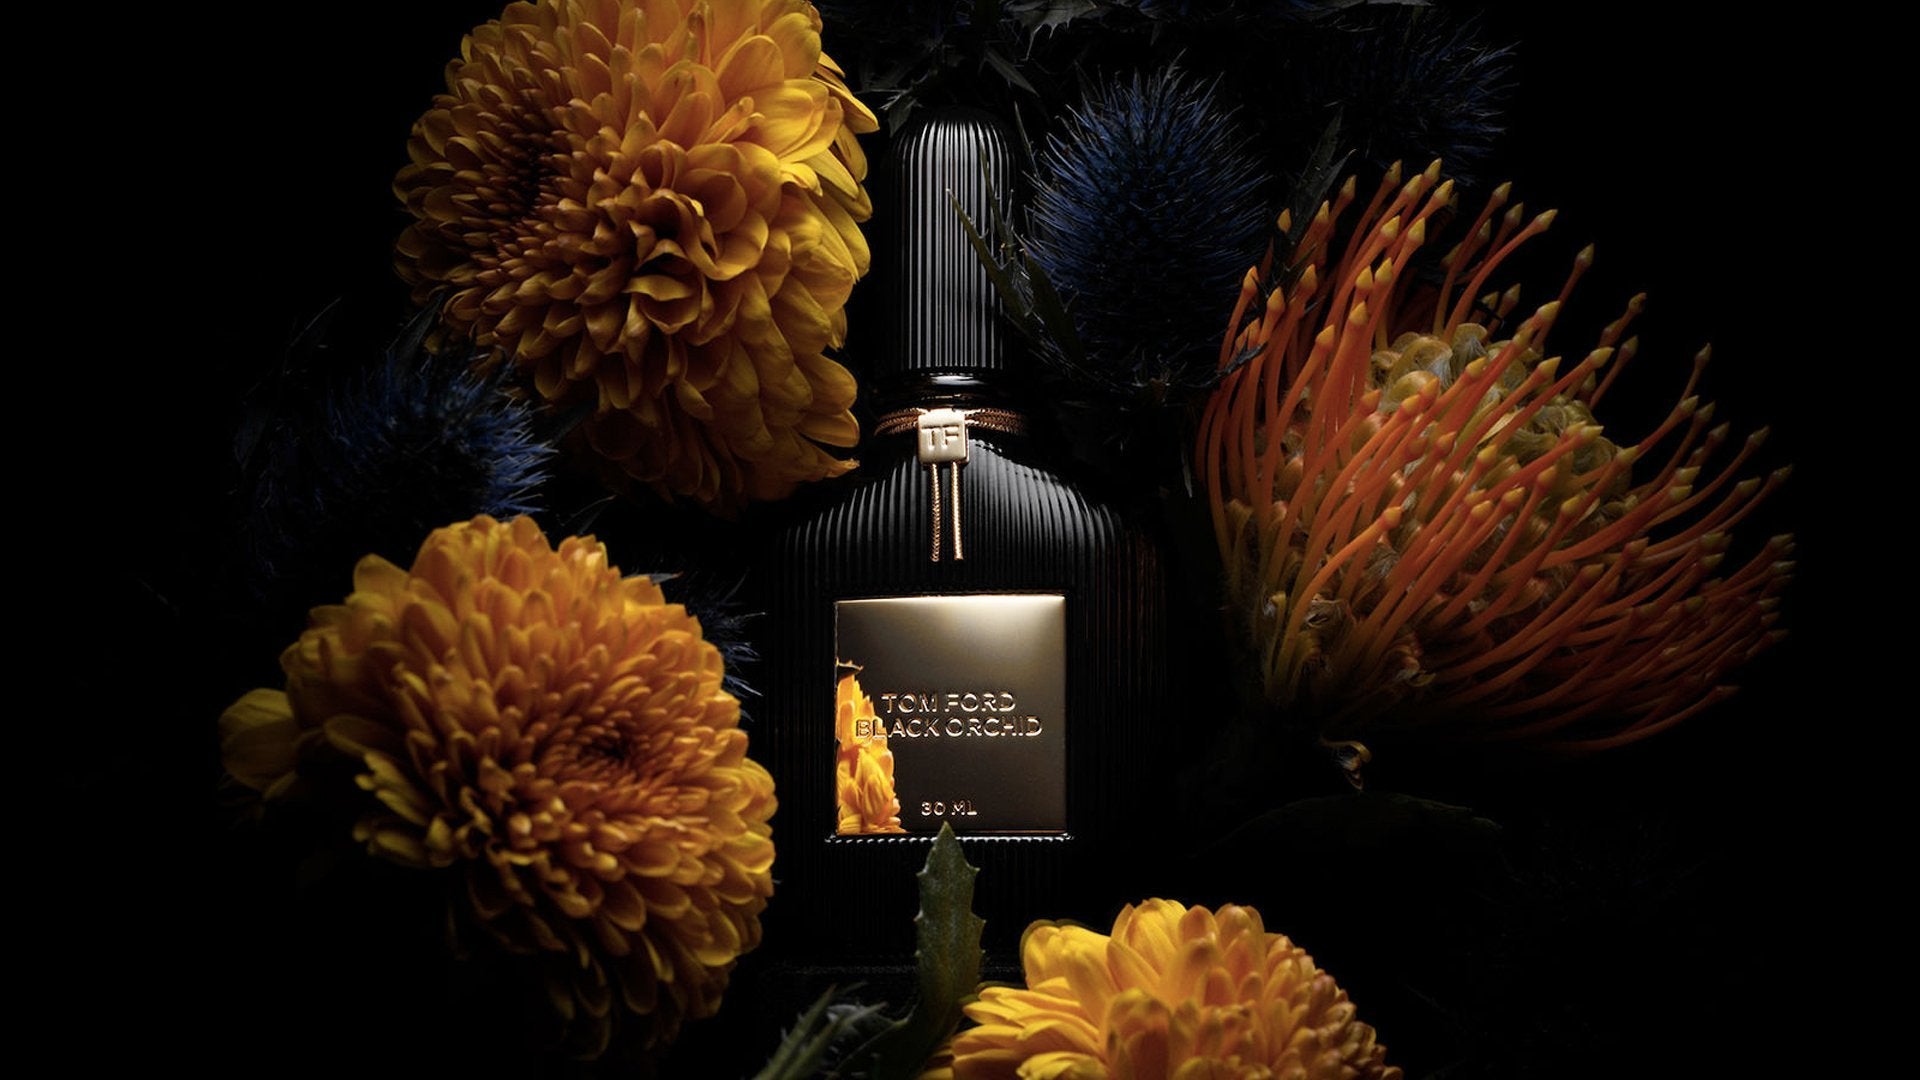 TOM FORD Velvet Orchid vs. Black Orchid: What’s the Difference? - My Perfume Shop